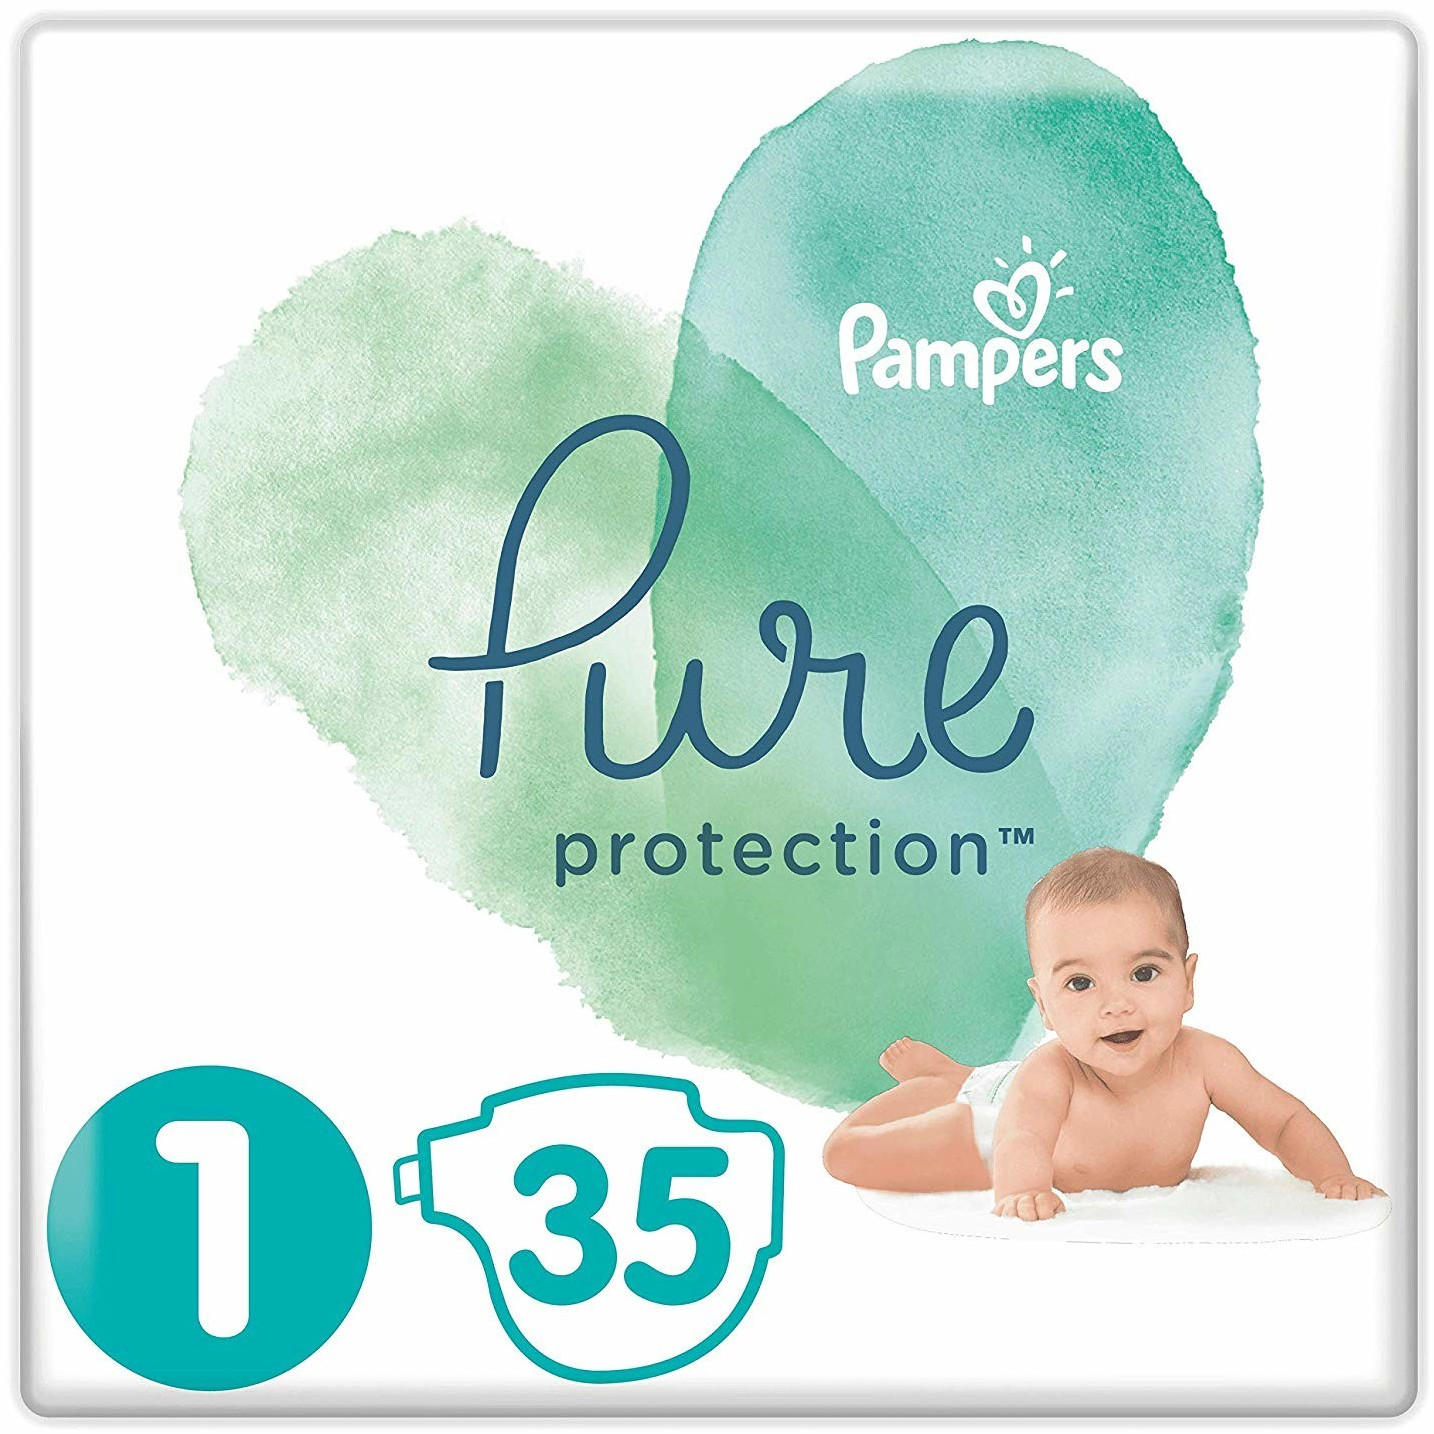 Pampers Pure Protection Size 1 (2-5 kg) 35 pcs.